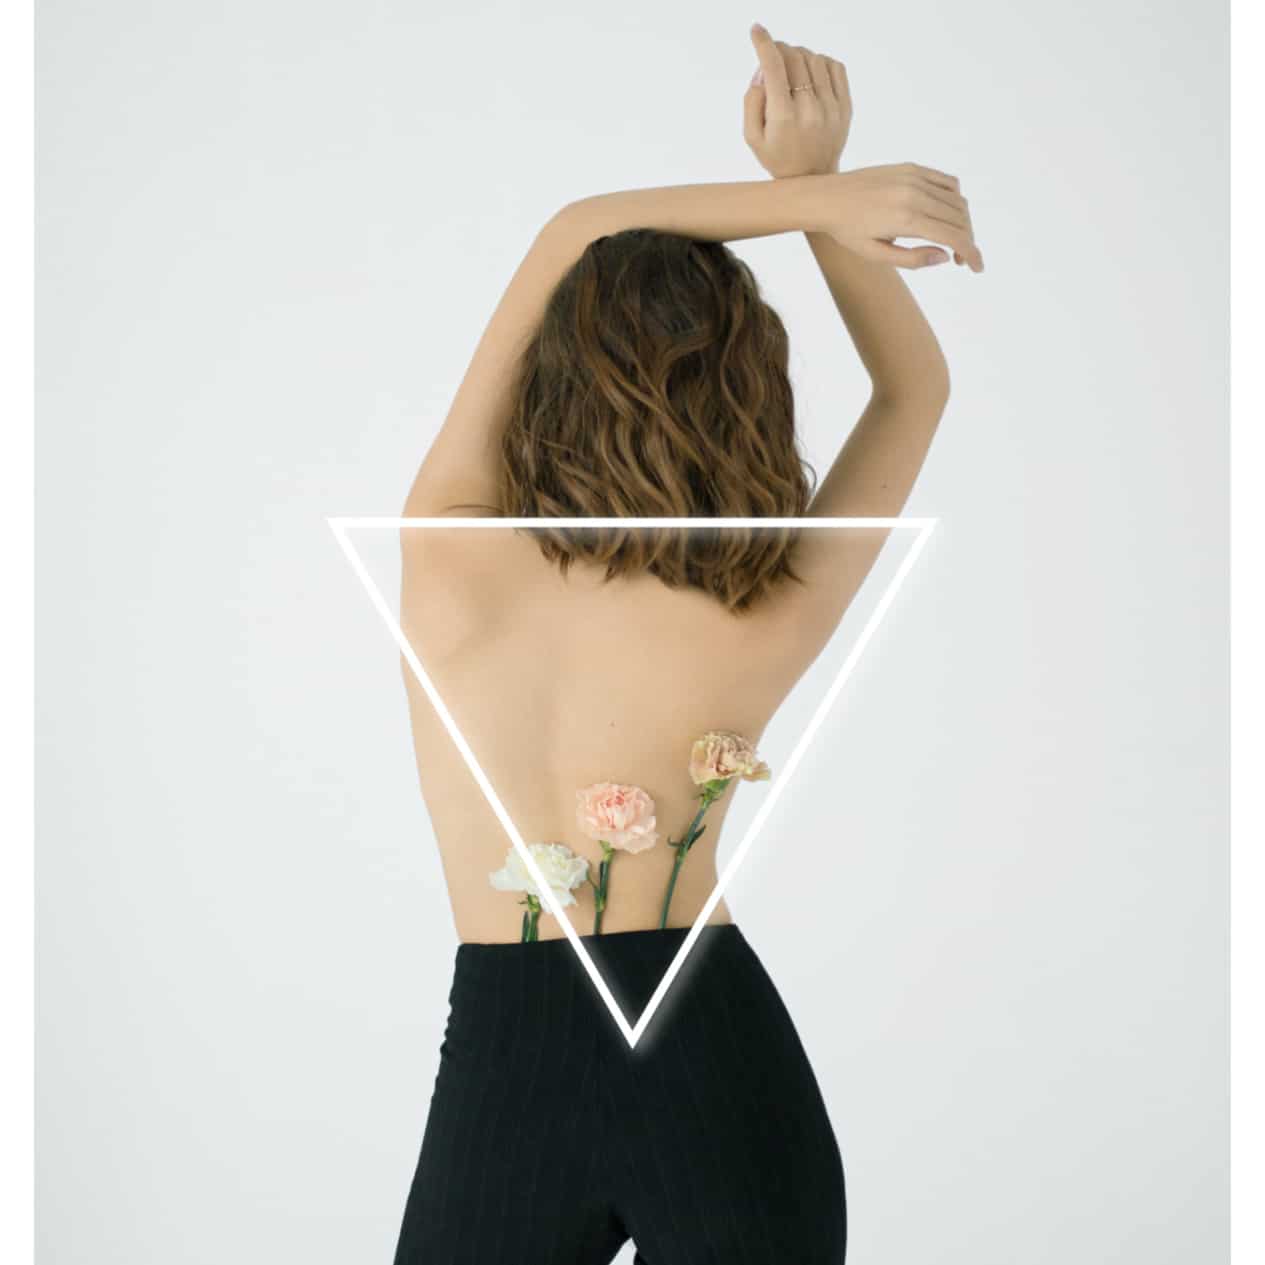 Young woman standing backwards with an upside down triangle drawn on her back to represent broad shoulders. 